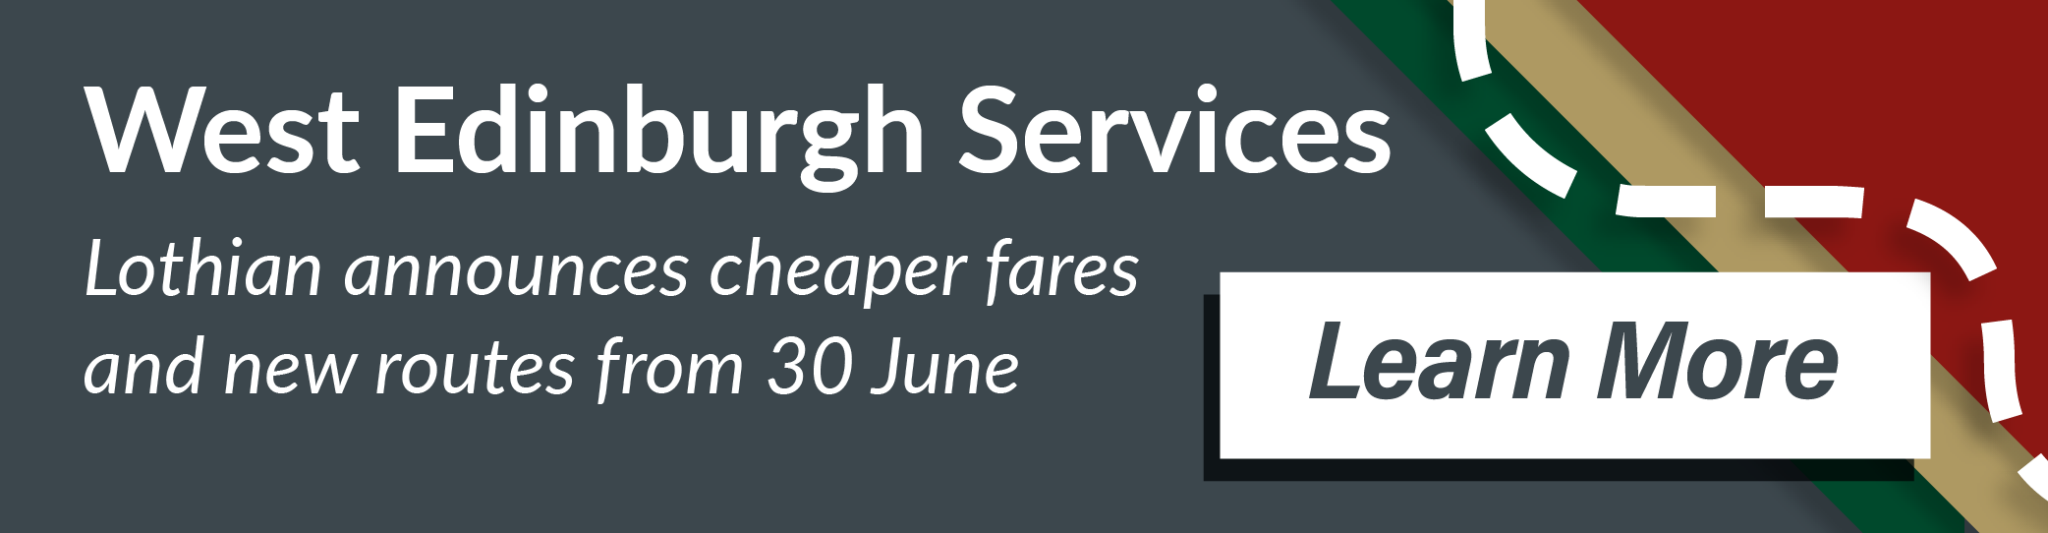 West Edinburgh Services. Lothian announces cheaper fares and new routes from 30 June. Learn more.